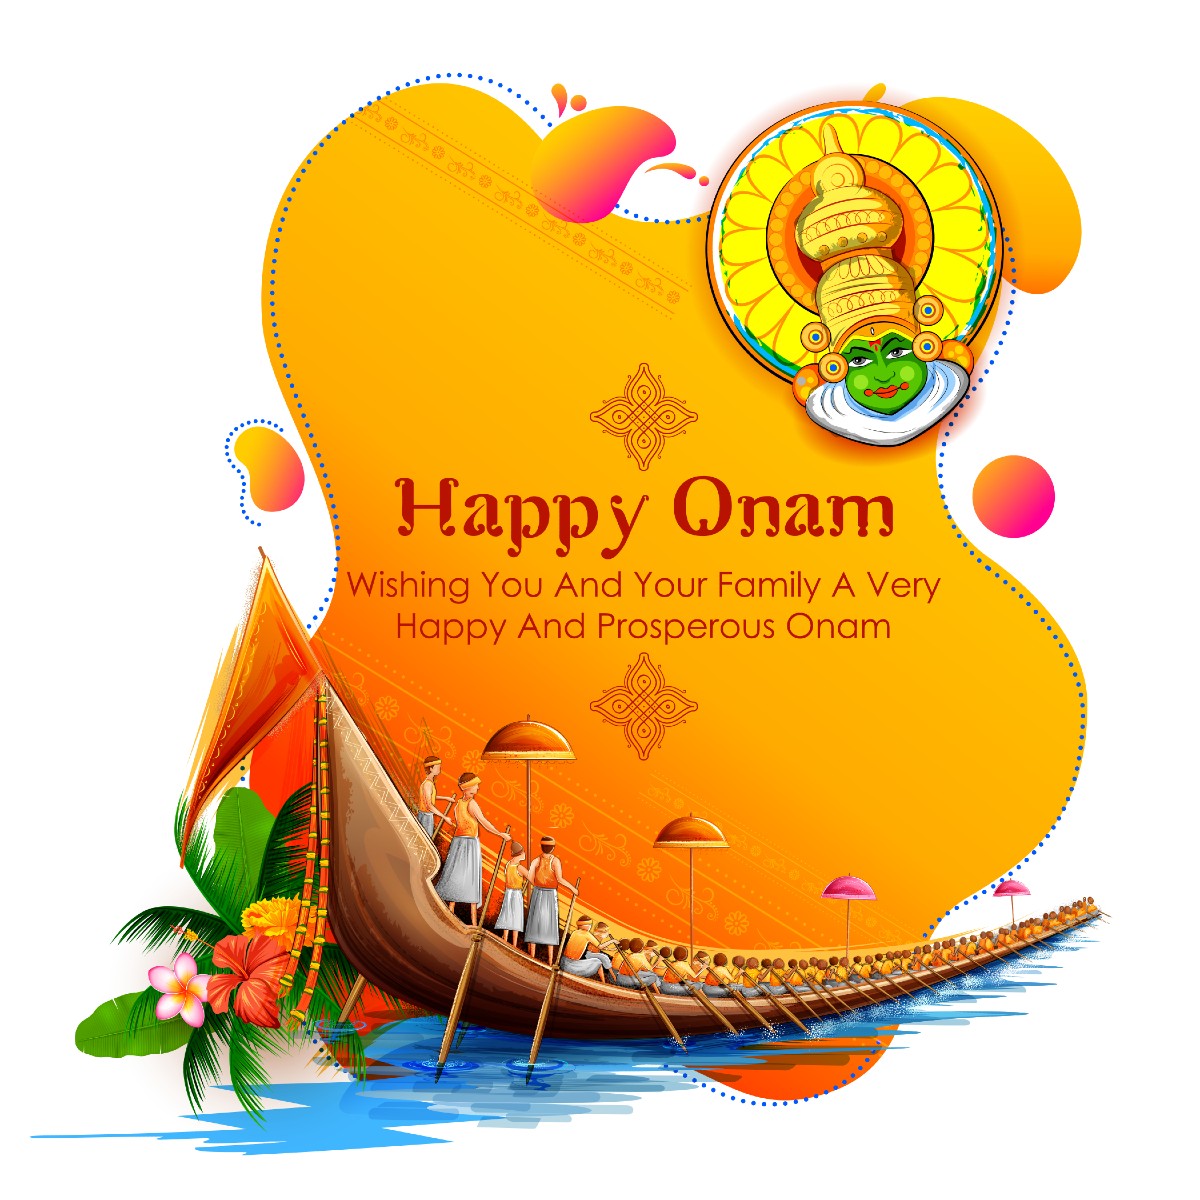 Happy Onam 2021 Images, Wishes, Quotes, Messages and WhatsApp